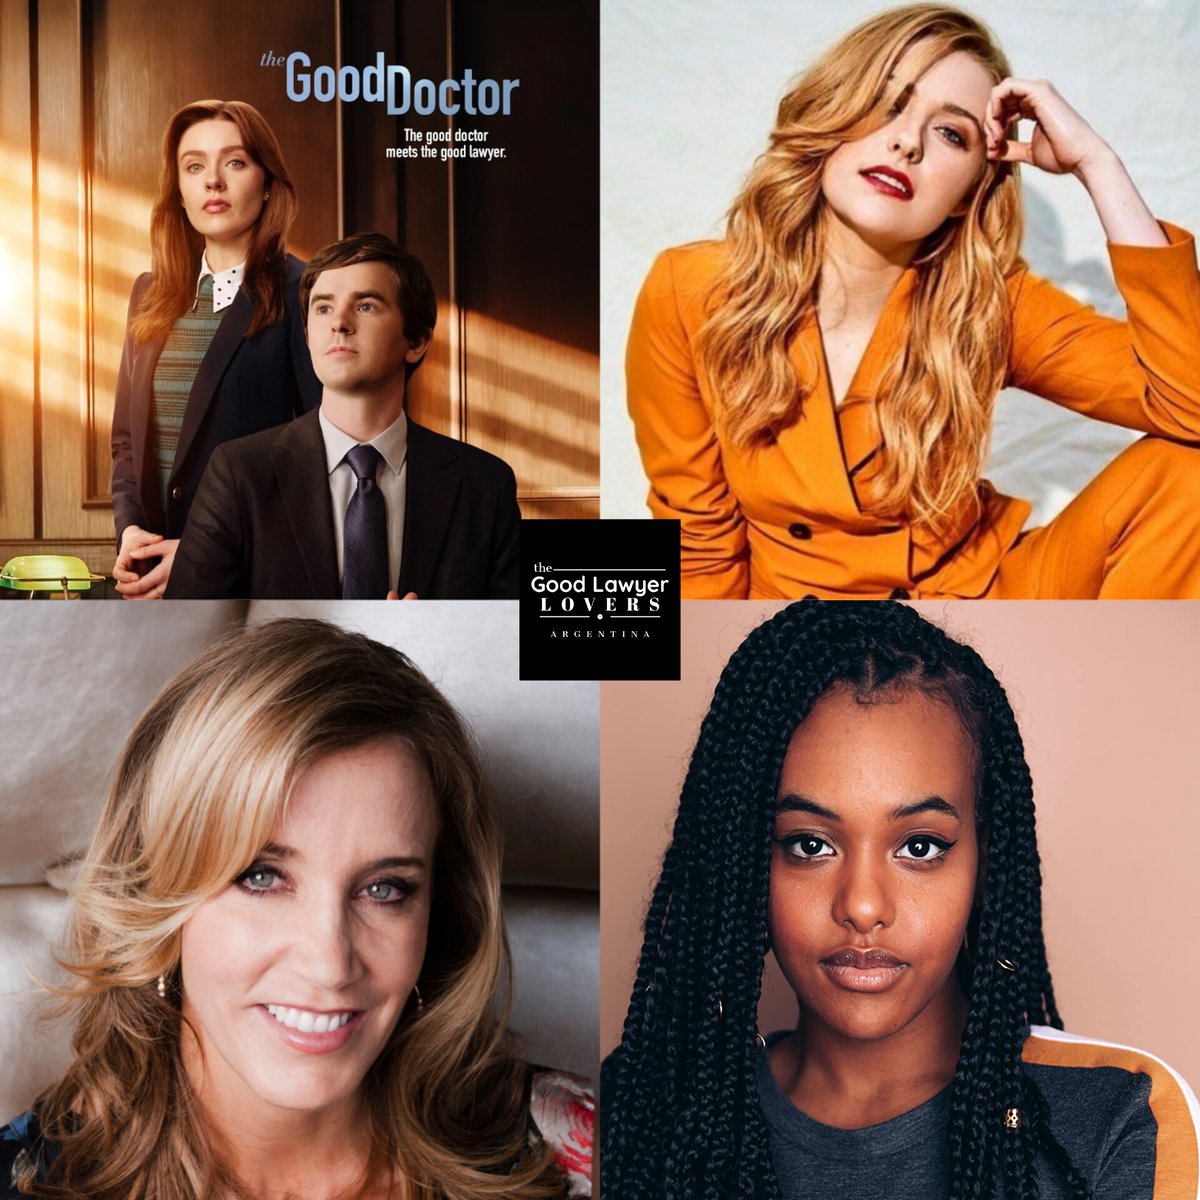 Its tonight !!! 
The time has come. 

Watch and support these three talented and incredible women. 

@kennedymcmann
#FelicityHuffman
#BethlehemMillion

#TheGoodLawyer
#TheGoodDoctor
#FreddieHighmore
@GoodDoctorABC